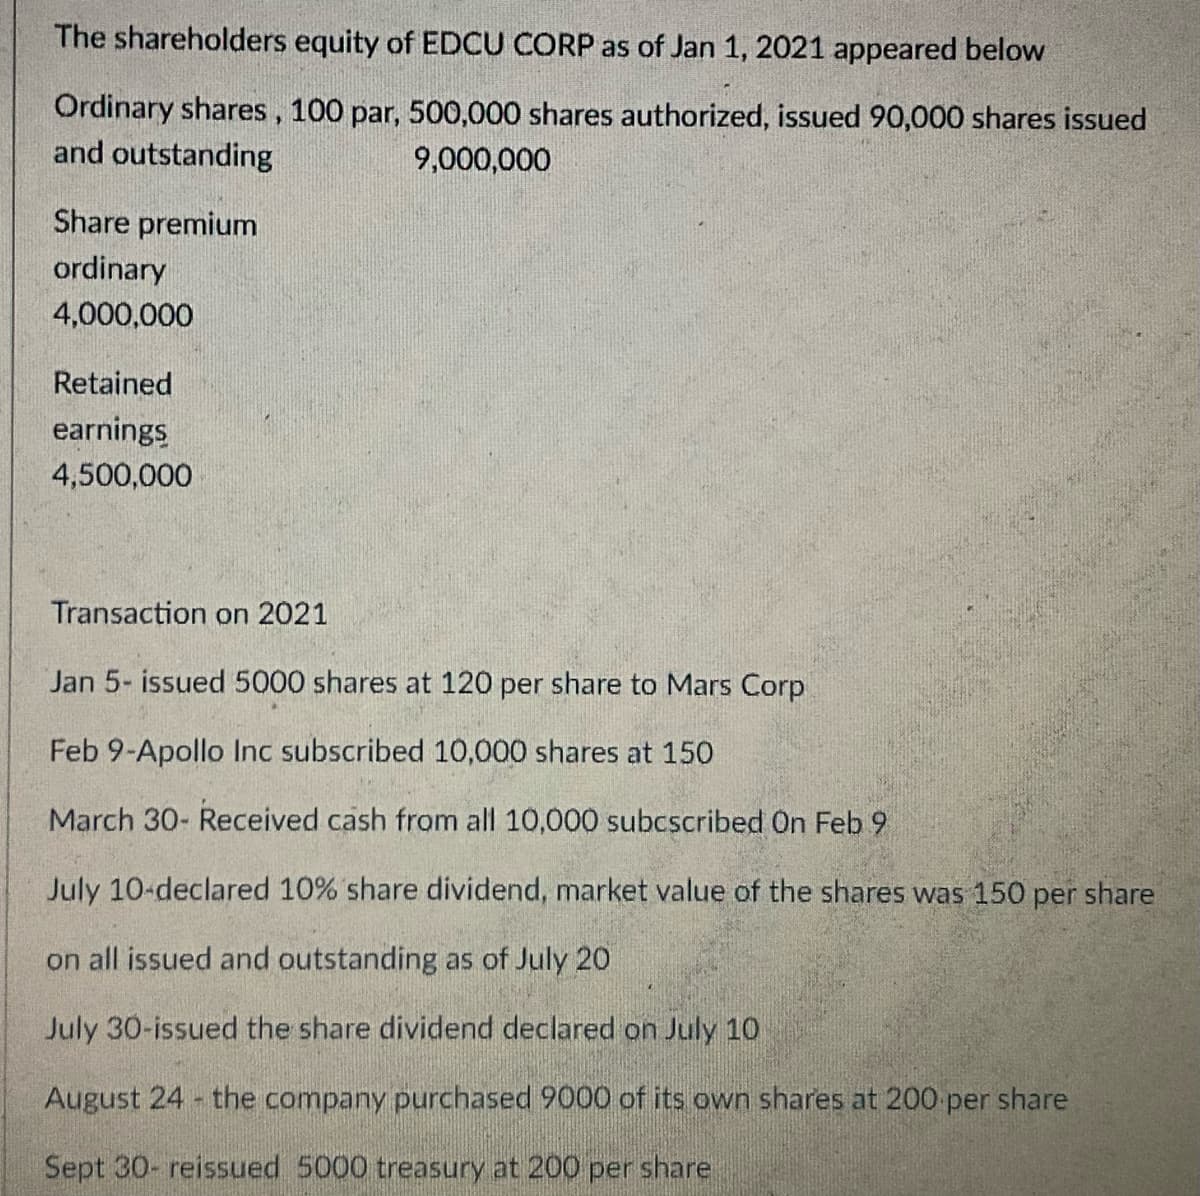 The shareholders equity of EDCU CORP as of Jan 1, 2021 appeared below
Ordinary shares, 100 par, 500,000 shares authorized, issued 90,000 shares issued
and outstanding
9,000,000
Share premium
ordinary
4,000,000
Retained
earnings
4,500,000
Transaction on 2021
Jan 5- issued 5000 shares at 120 per share to Mars Corp
Feb 9-Apollo Inc subscribed 10,000 shares at 150
March 30- Received cash from all 10,000 subcscribed On Feb 9
July 10-declared 10% share dividend, market value of the shares was 150 per share
on all issued and outstanding as of July 20
July 30-issued the share dividend declared on July 10
August 24 the company purchased 9000 of its own shares at 200 per share
Sept 30- reissued 5000 treasury at 200 per share
